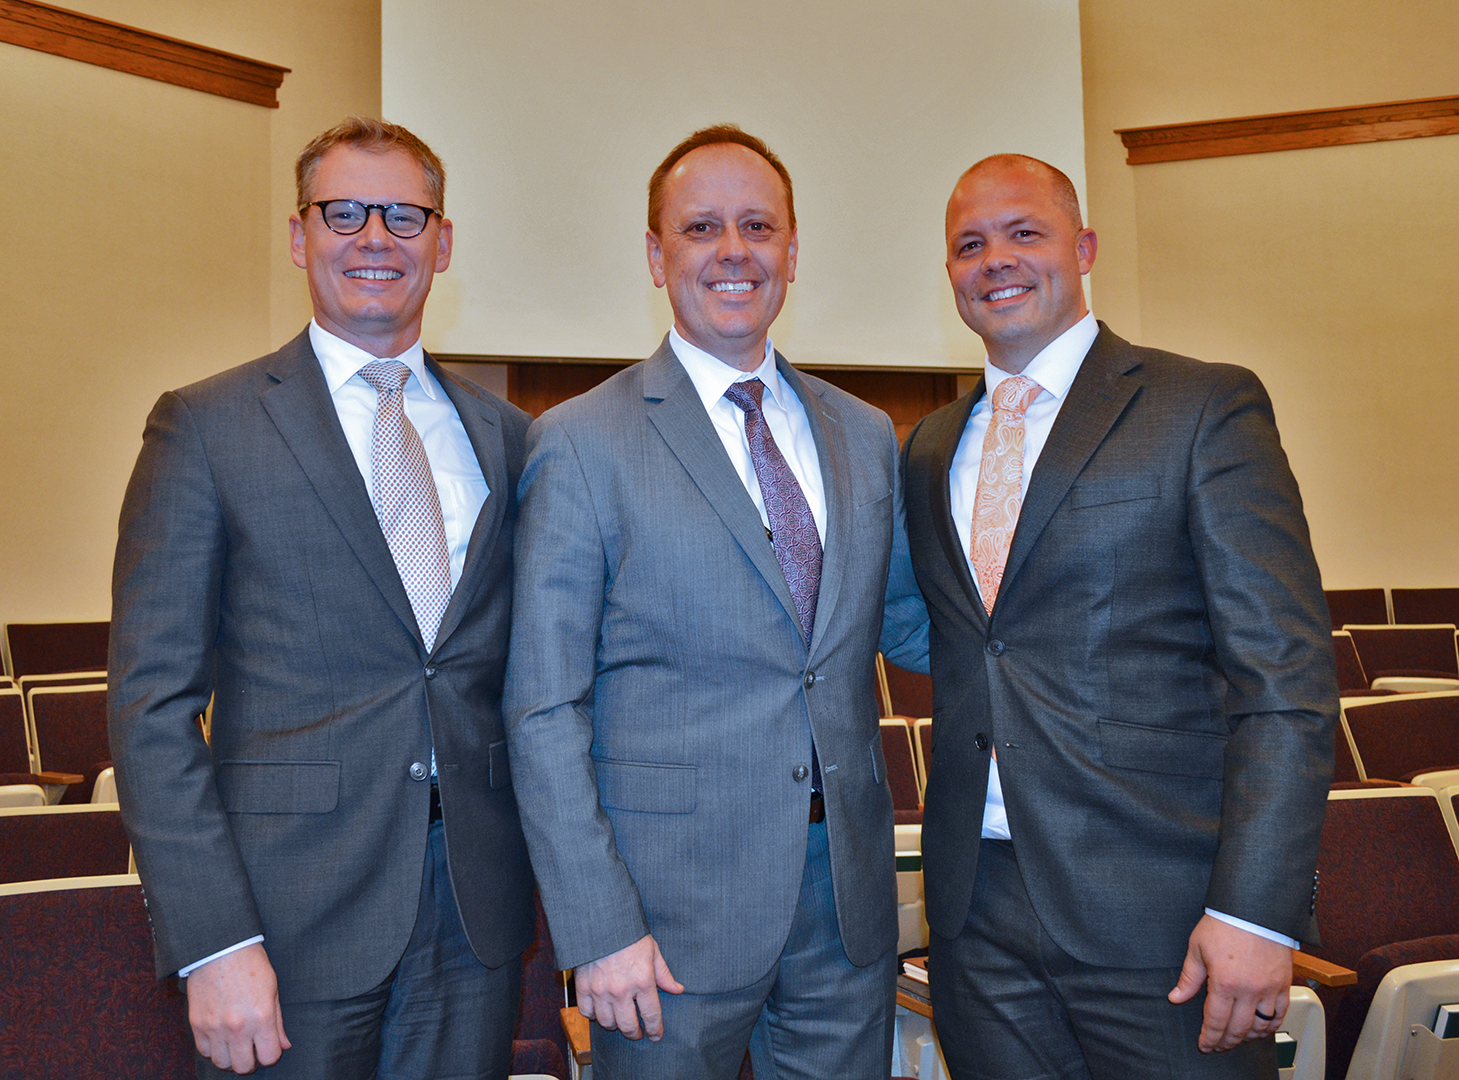 Presidency of the Powder Springs Georgia Stake: President Kenley Shell (center), First Counselor Ben Brooks (left), and Second Counselor Anthony Yandow (right).